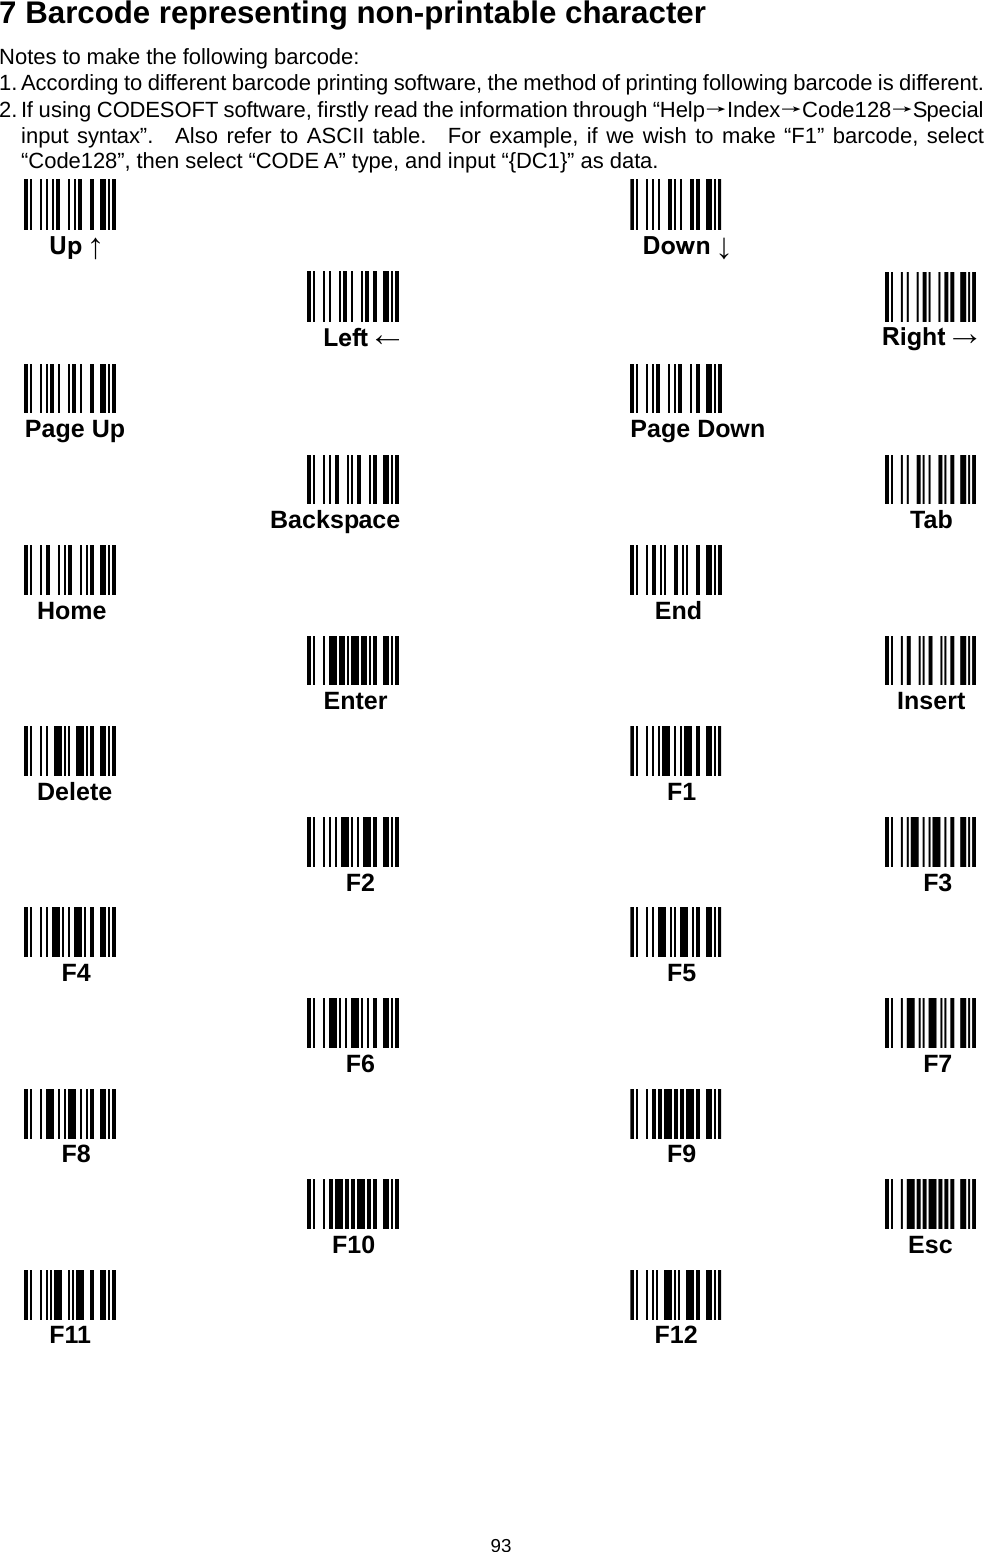 93 7 Barcode representing non-printable character   Notes to make the following barcode: 1. According to different barcode printing software, the method of printing following barcode is different.     2. If using CODESOFT software, firstly read the information through “Help→Index→Code128→Special input syntax”.  Also refer to ASCII table.  For example, if we wish to make “F1” barcode, select “Code128”, then select “CODE A” type, and input “{DC1}” as data.    Up ↑   Down ↓  Left ←    Right →  Page Up   Page Down  Backspace   Tab  Home   End  Enter   Insert  Delete   F1  F2   F3  F4   F5  F6   F7  F8   F9  F10   Esc  F11   F12 